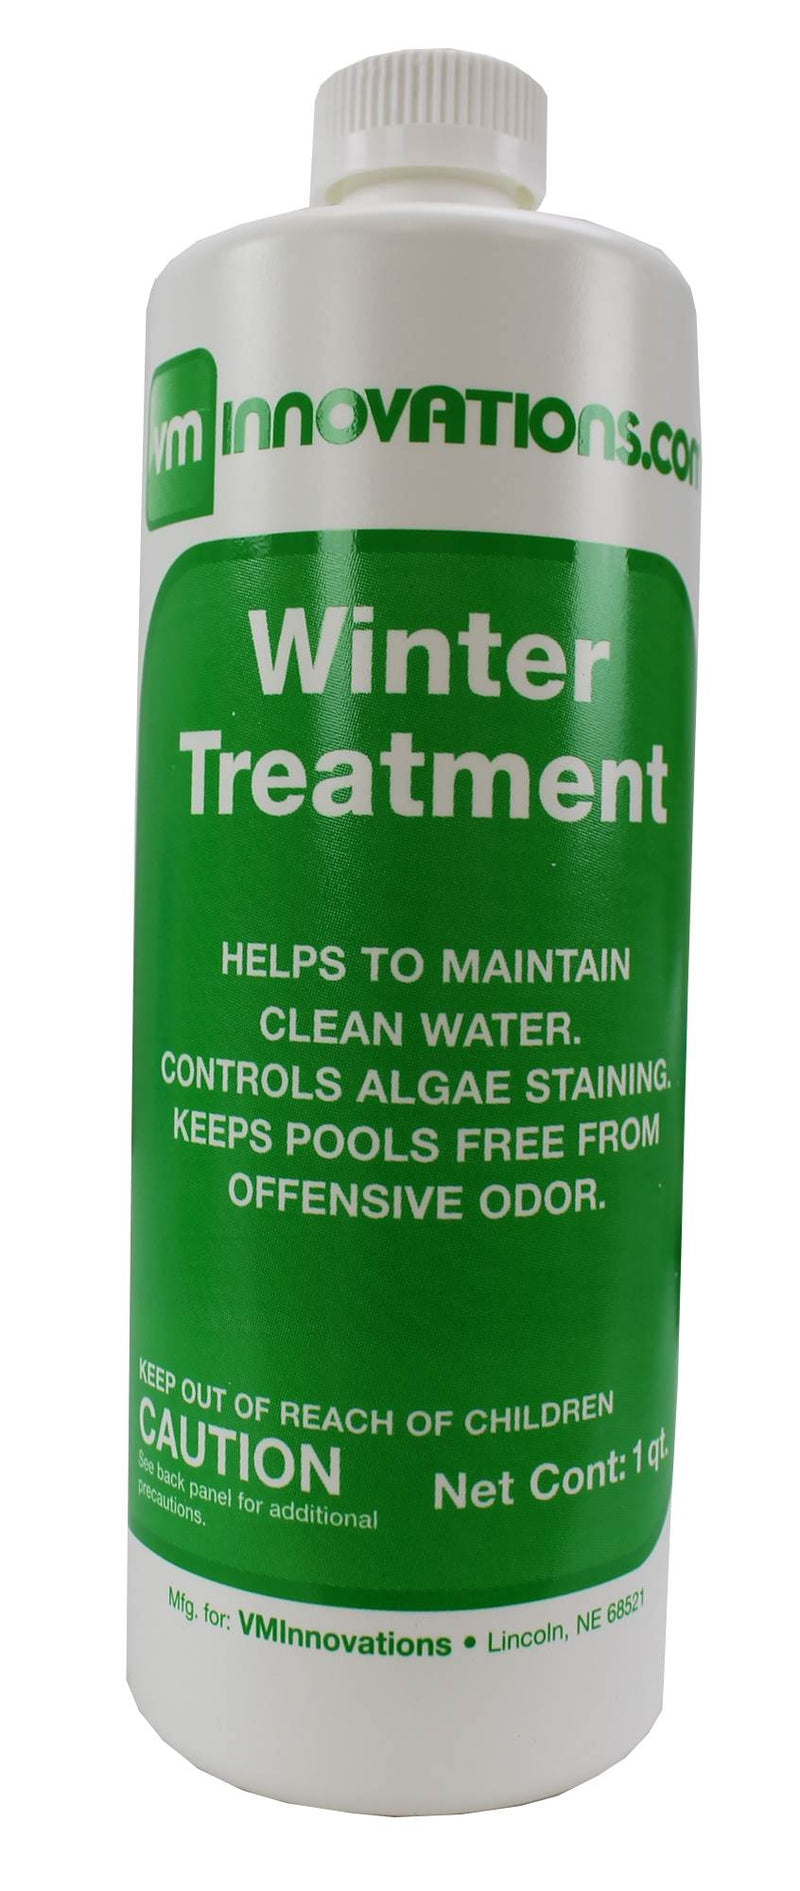 Swimming Pool Winterizing Treatment Closing Kit - Up To 10,000 Gallons (2 Pack)